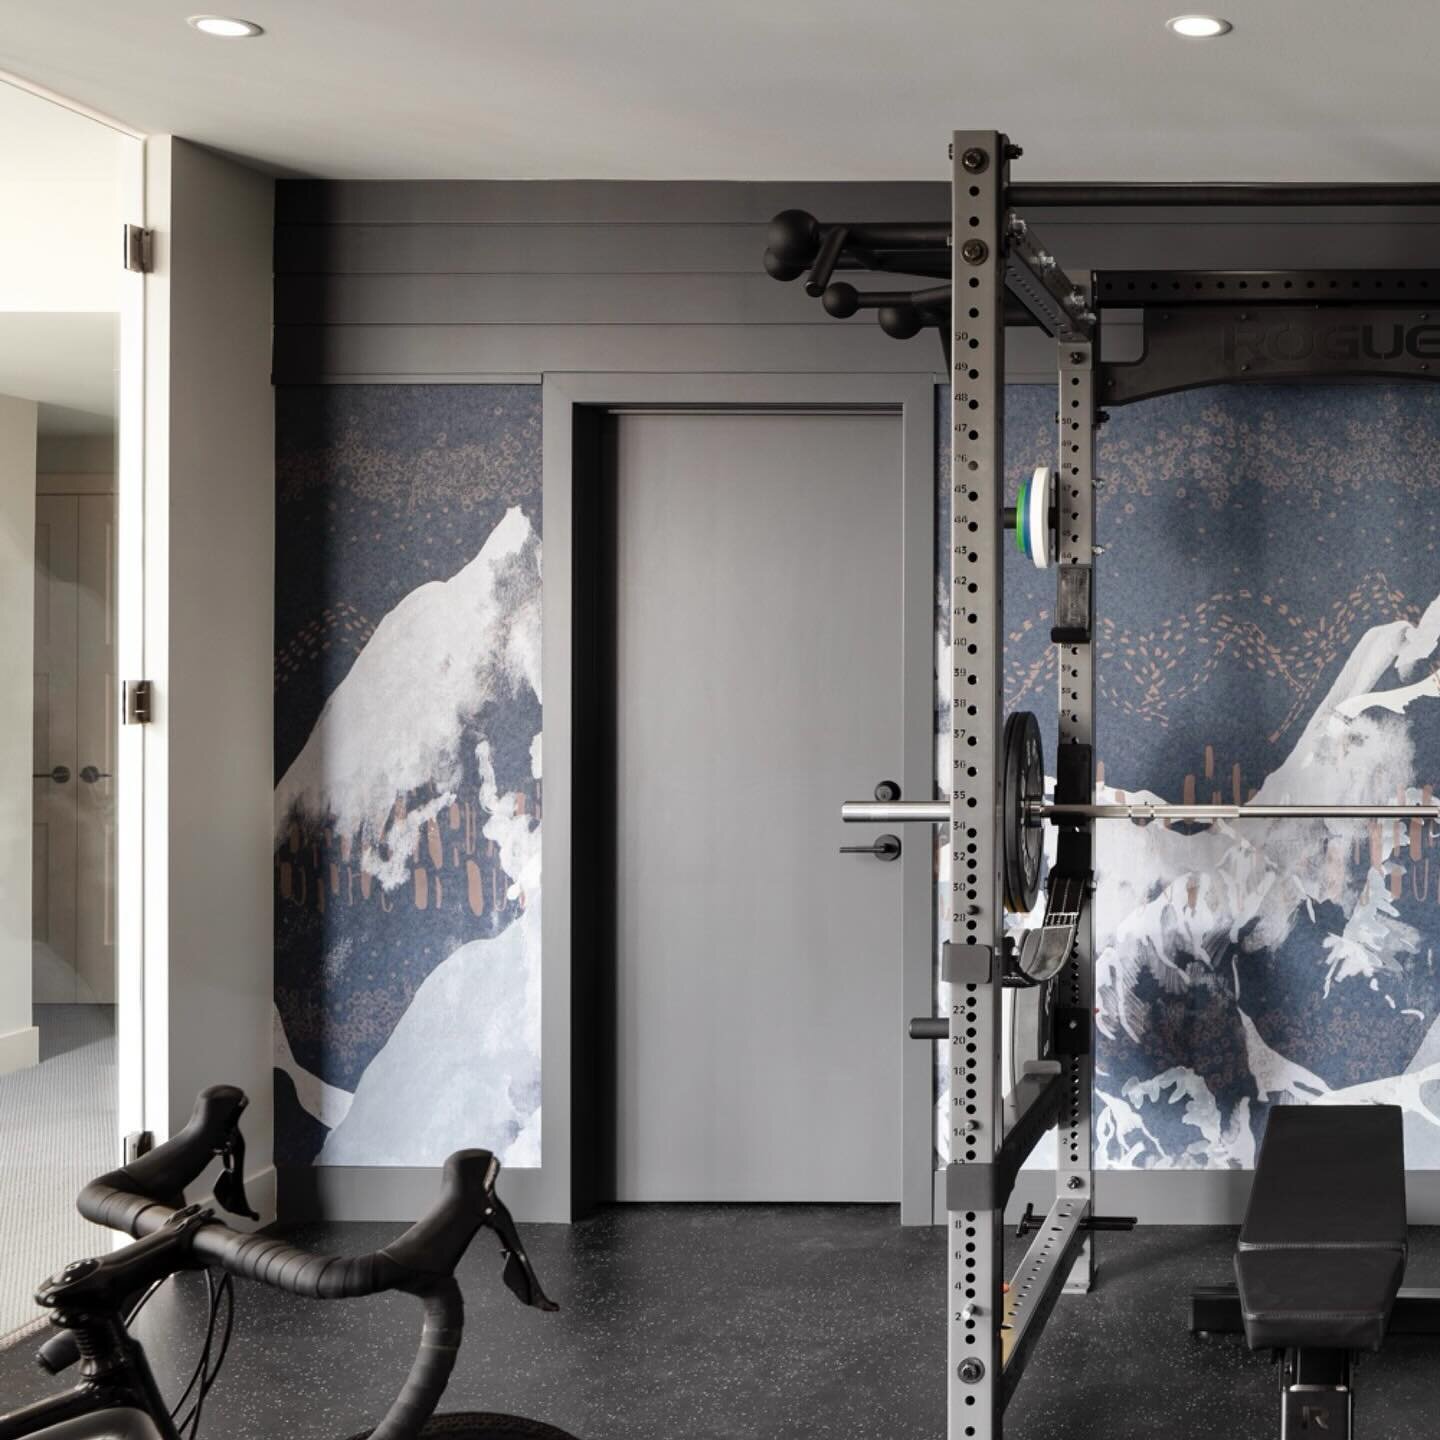 Motivation to work out is high in this bespoke home gym. A custom mural keeps the focus squarely on the reasons to put in the work. We worked with this family to craft a space that flows with the adjacent media area and fits all the key equipment and